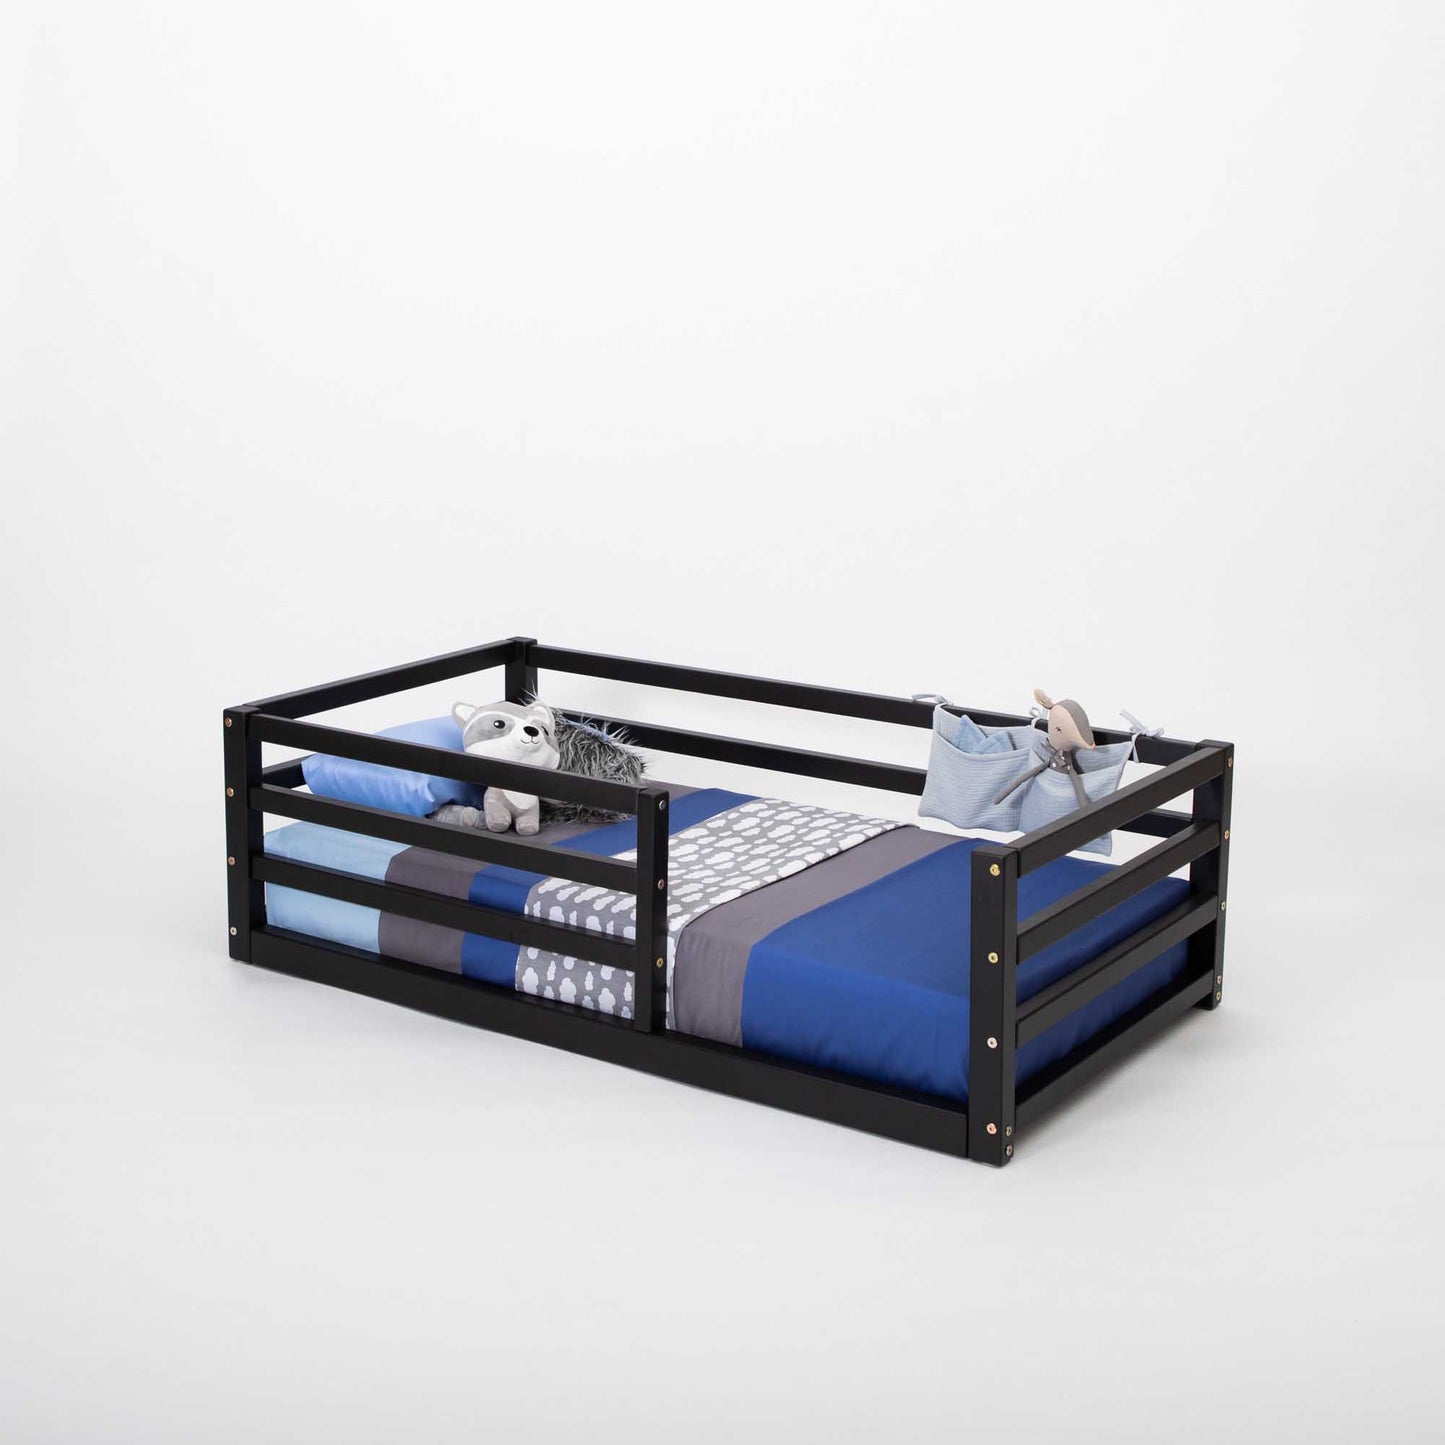 2-in-1 transformable kids' bed with a horizontal rail fence